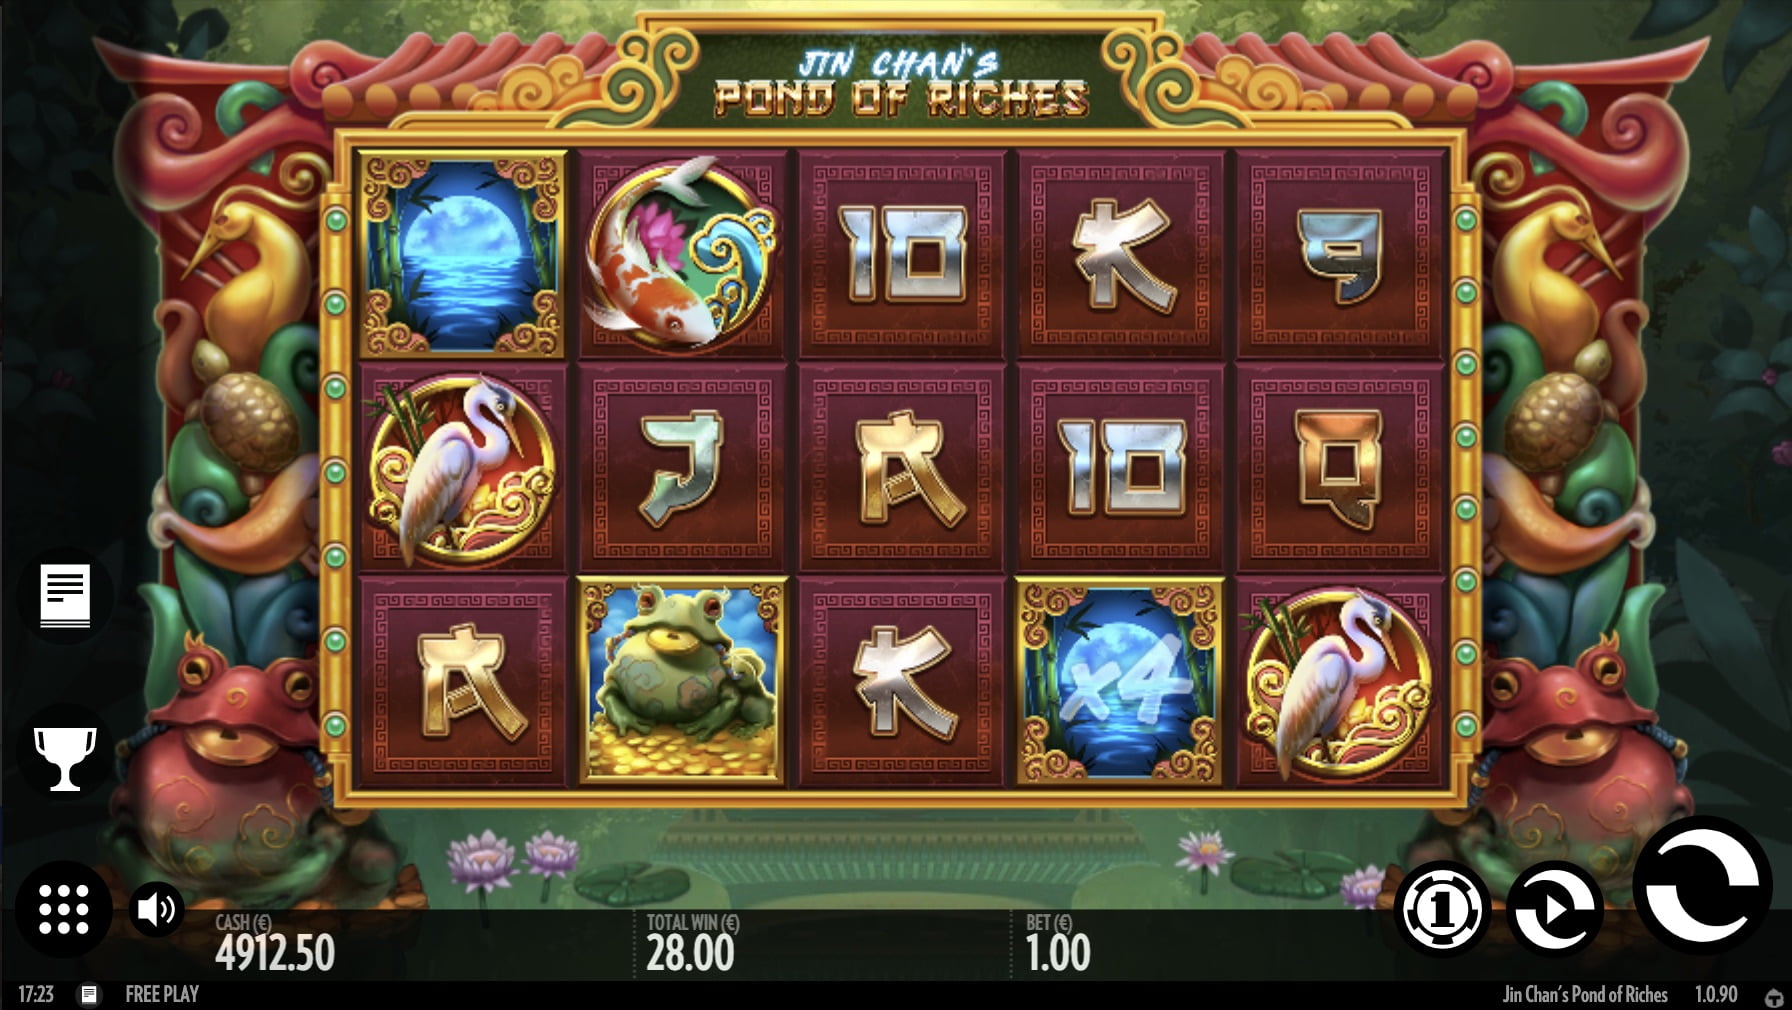 Jin Chan’s Pond of Riches Slot Review